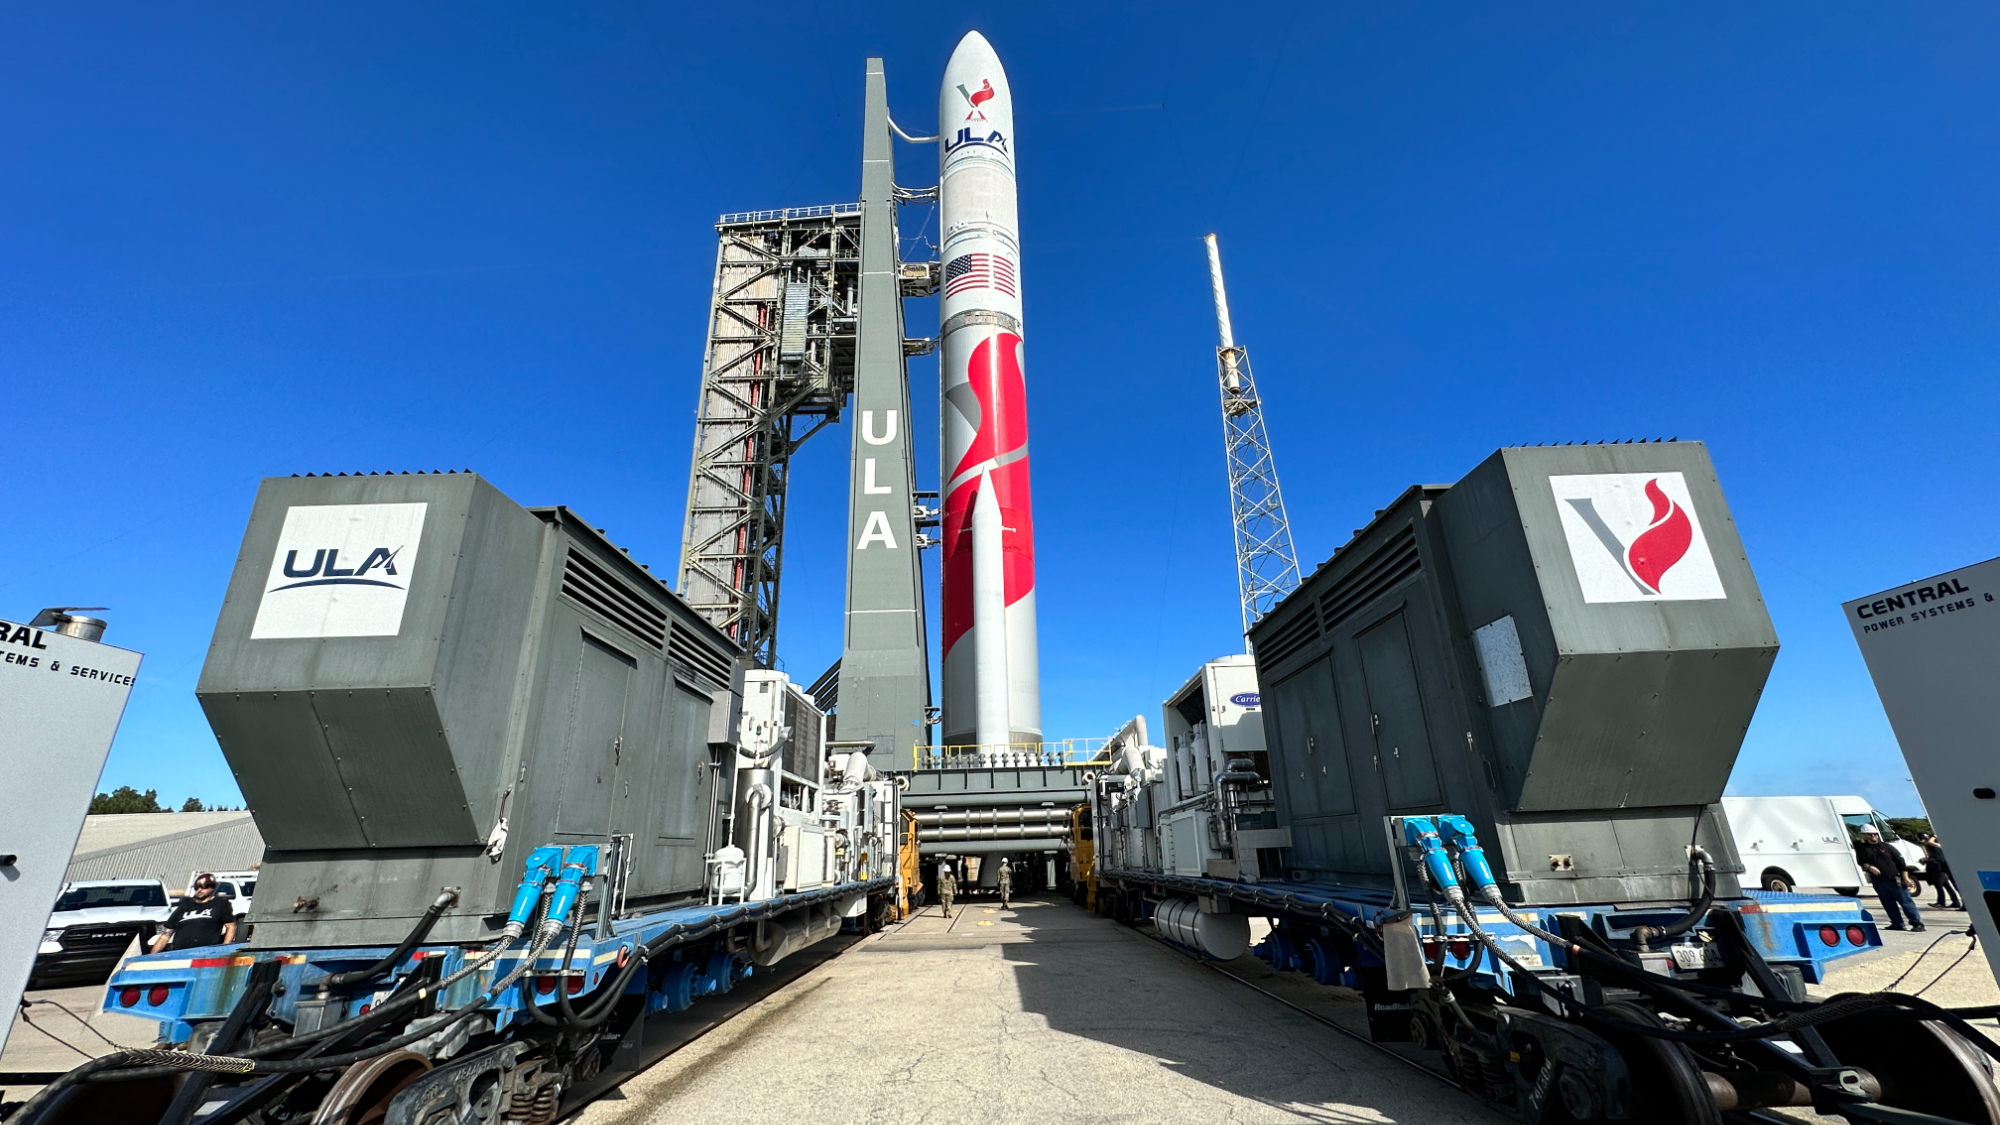 ULA’s 1st Vulcan Centaur rocket is ready to fly. Will it live long and prosper? Space